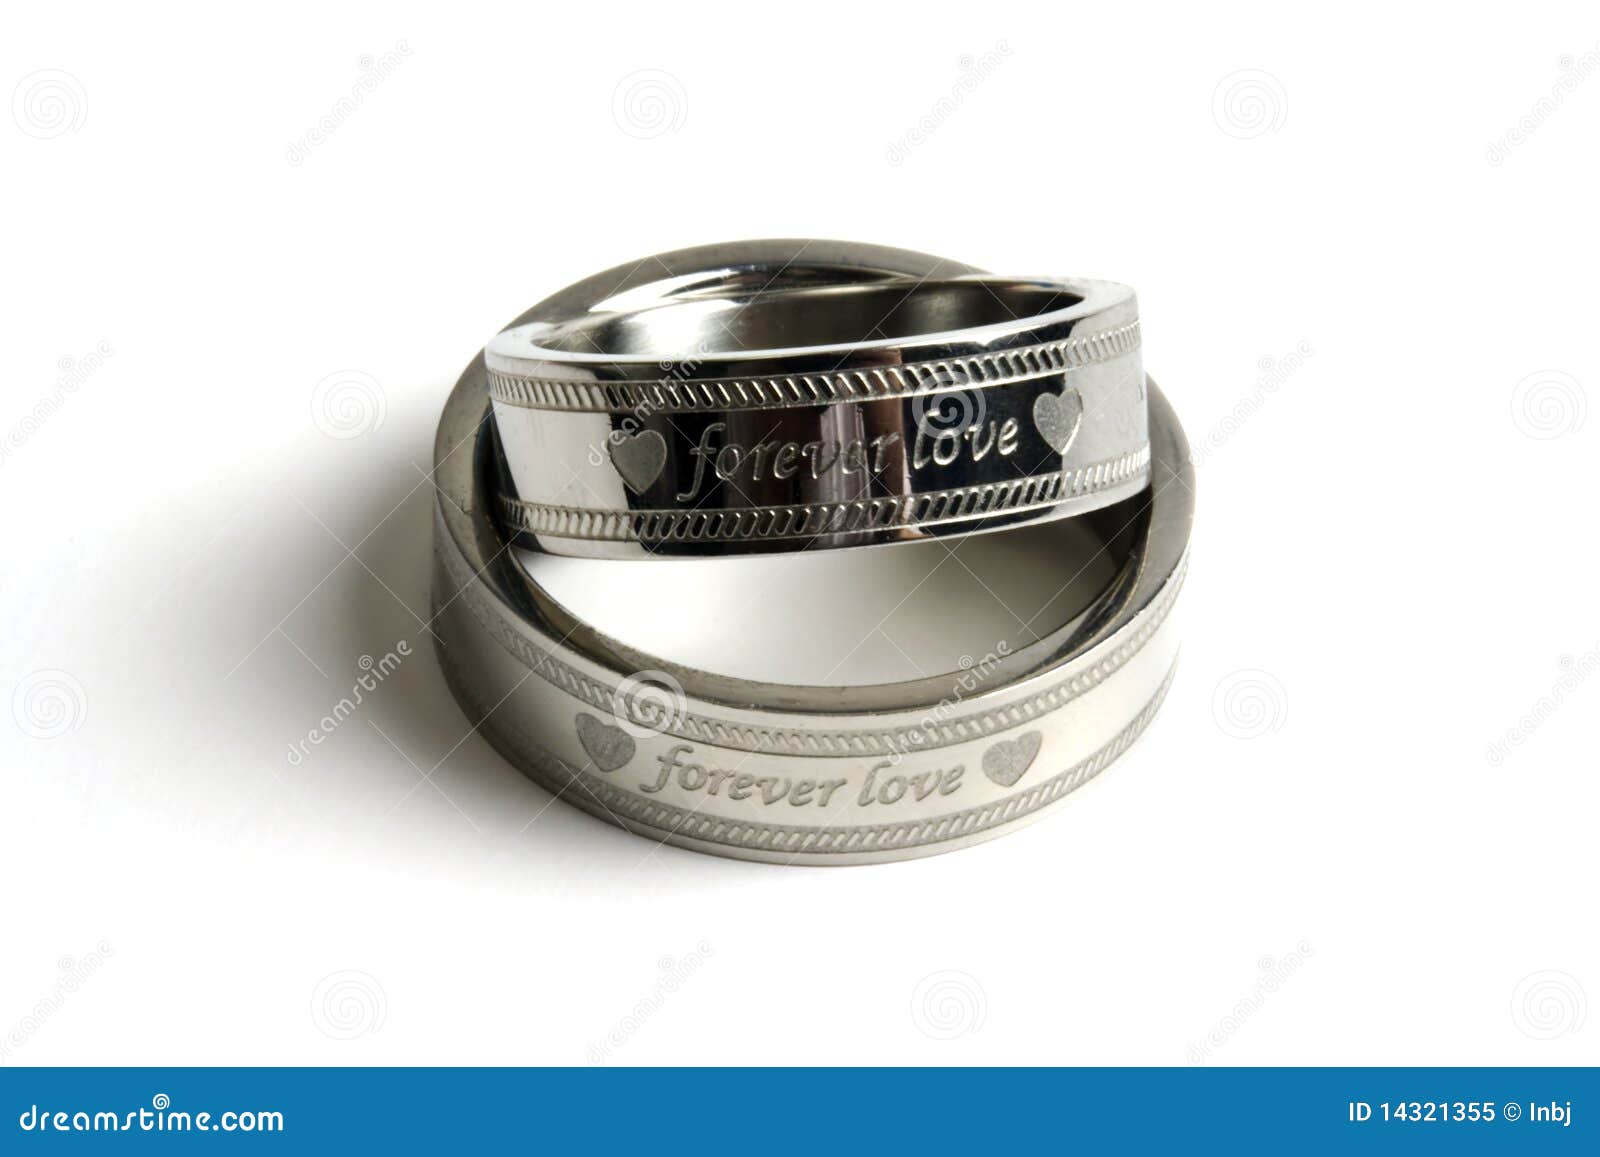 More similar stock images of ` His and hers wedding rings `